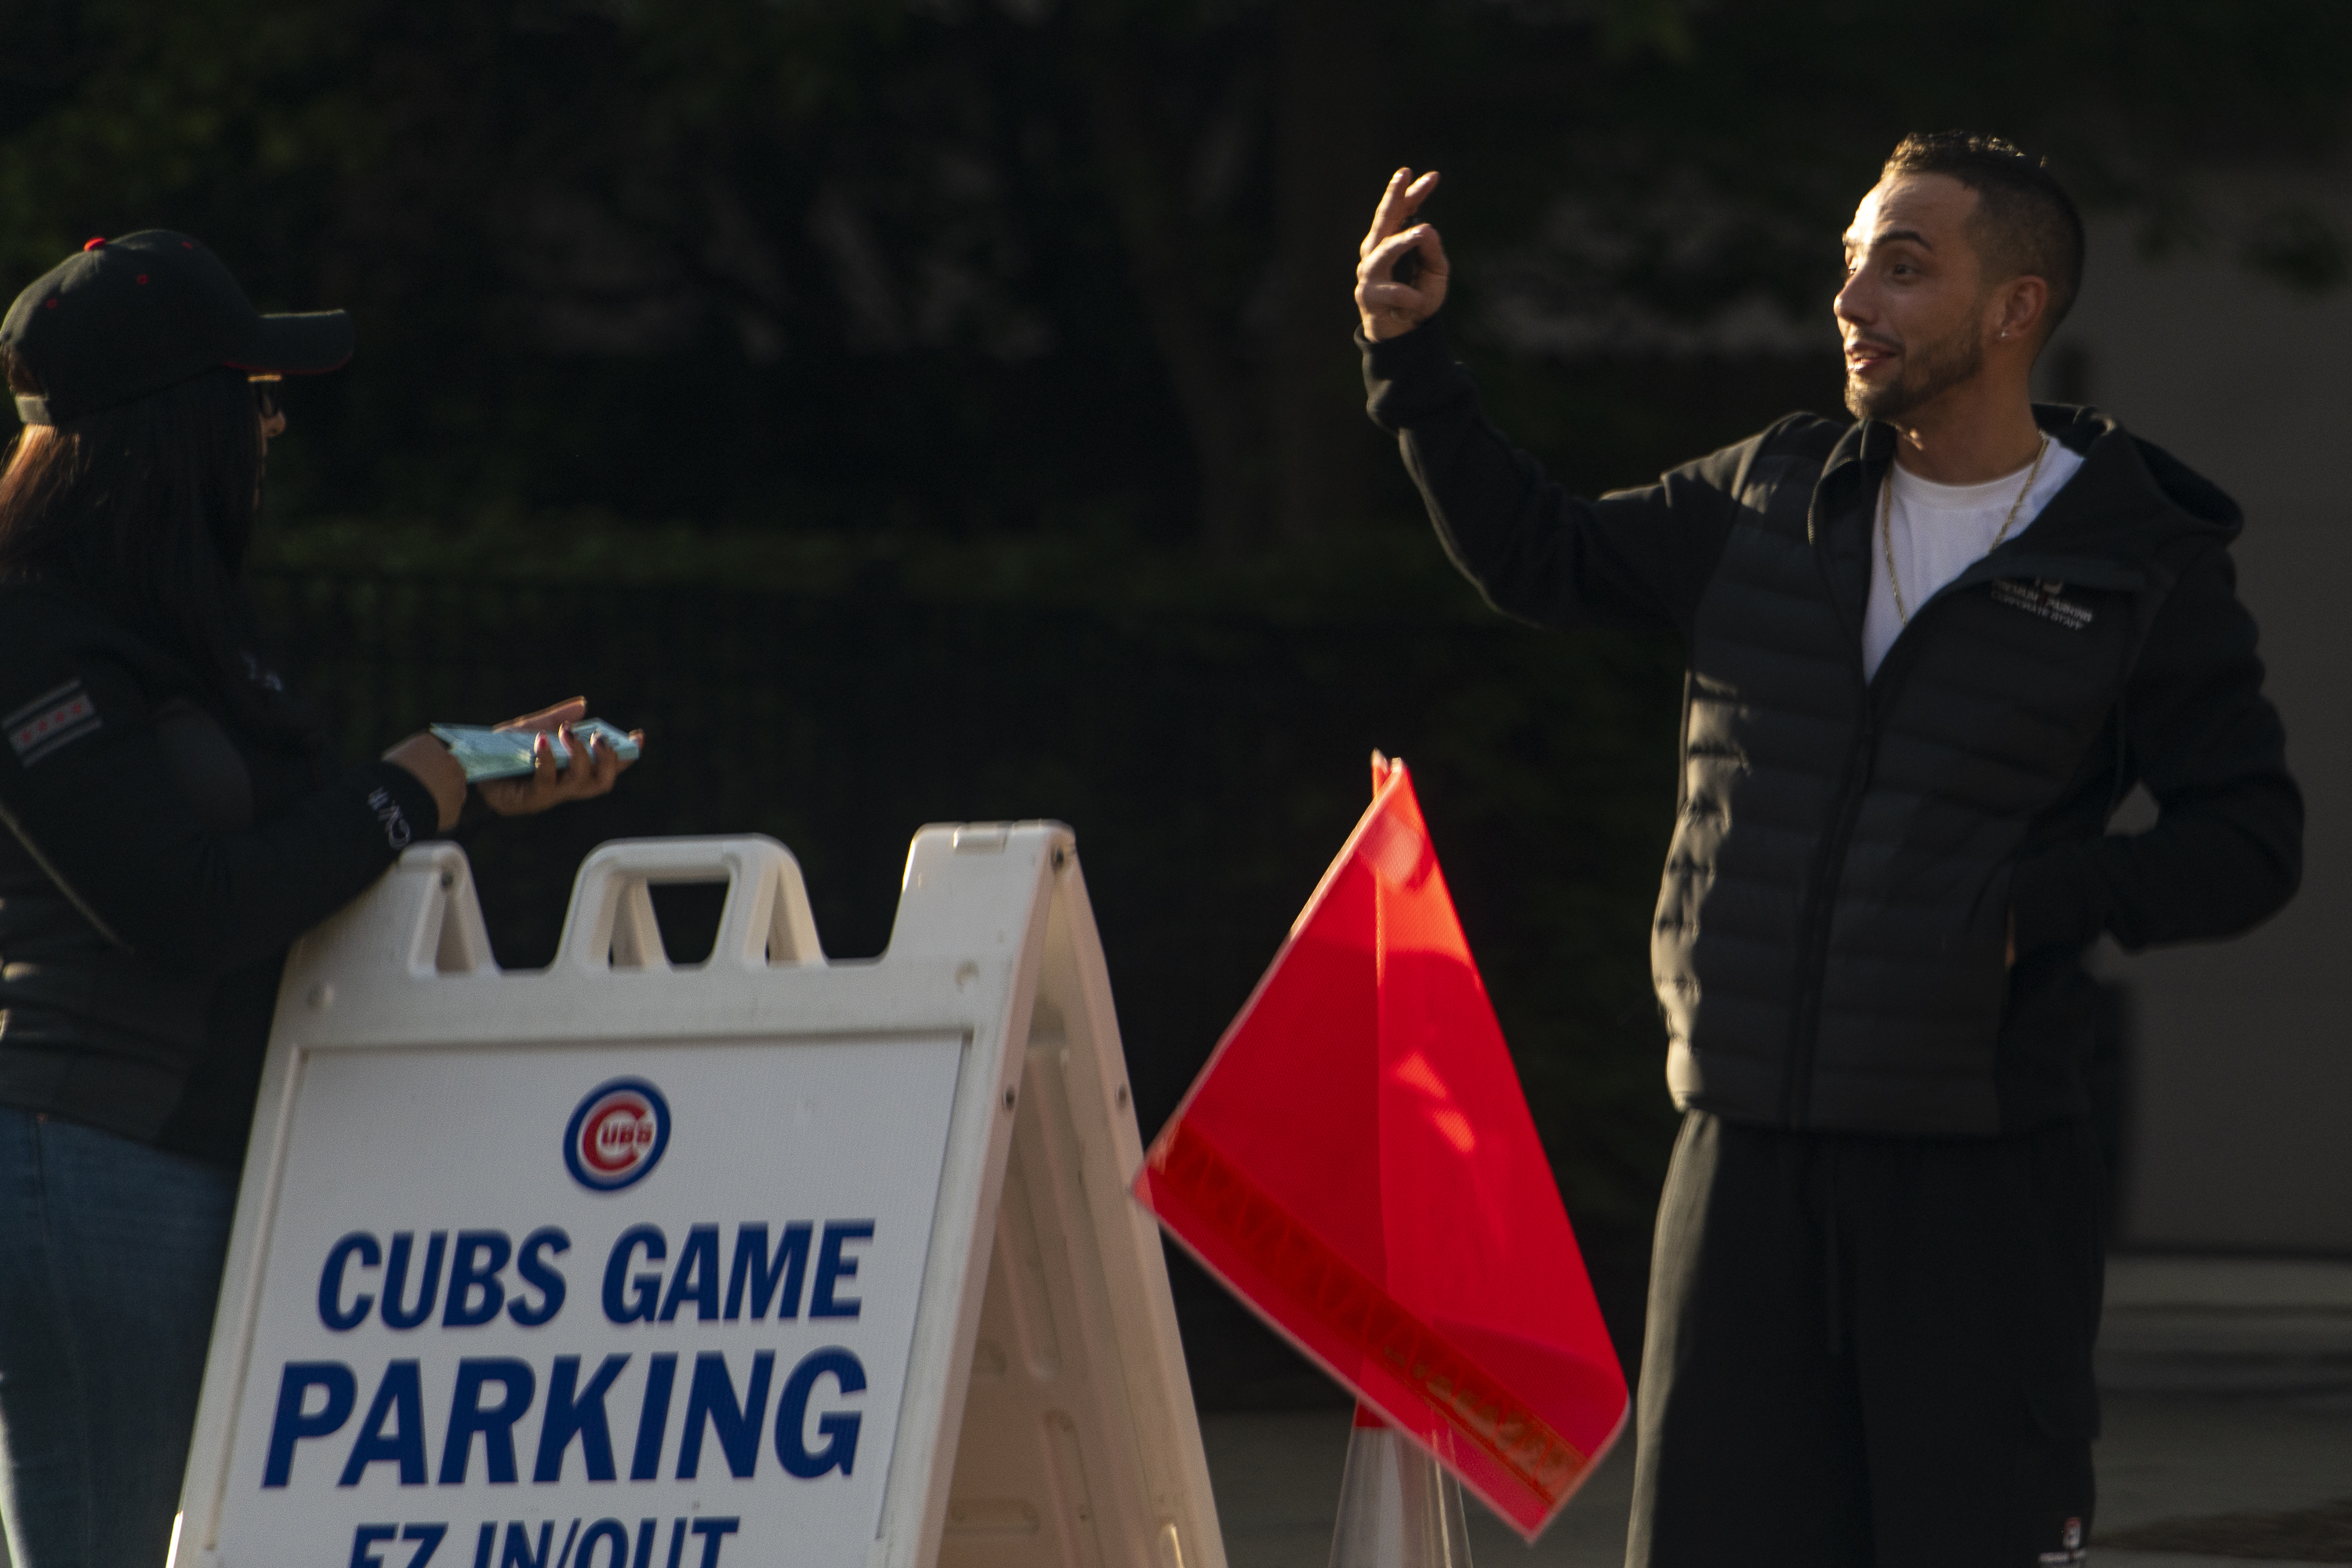 Premium 1 Parking owner Dylan&nbsp;Cirkic&nbsp;at a Chicago Public Schools owned-lot at 3830 N. Southport Ave. during a Cubs game this spring.